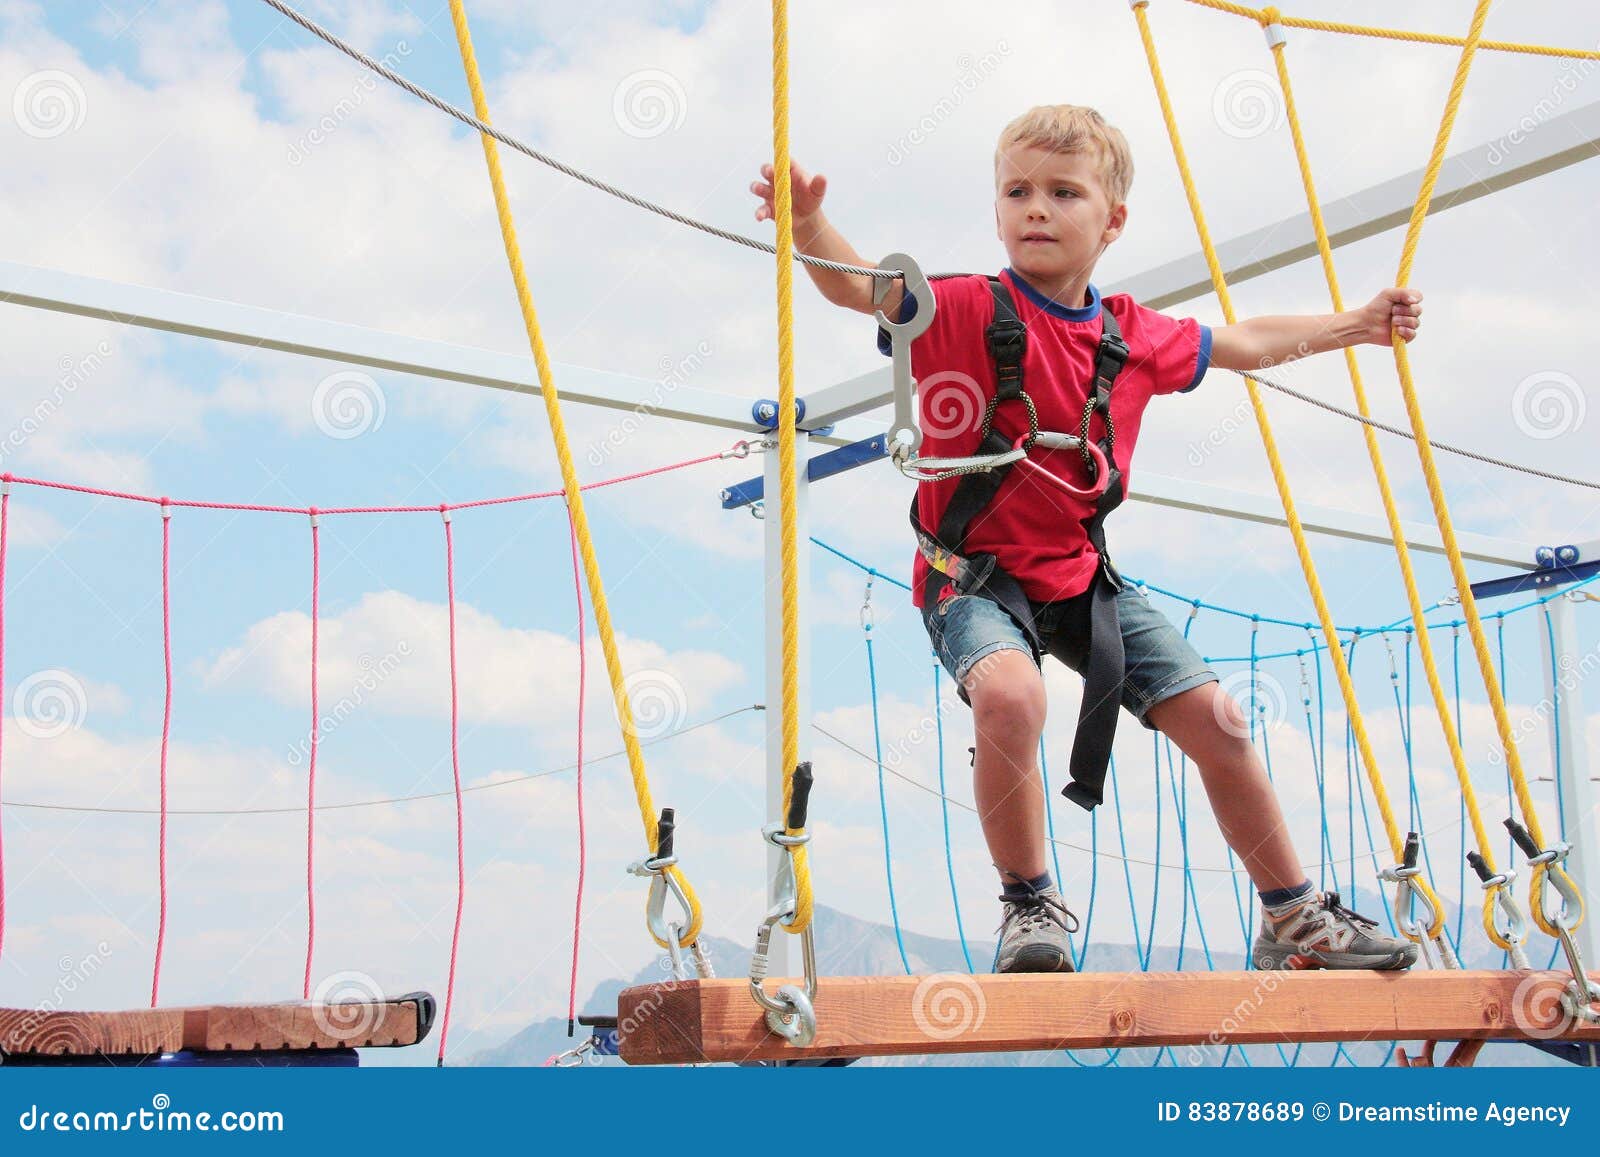 brave blond hair kid playing rope course outdoor